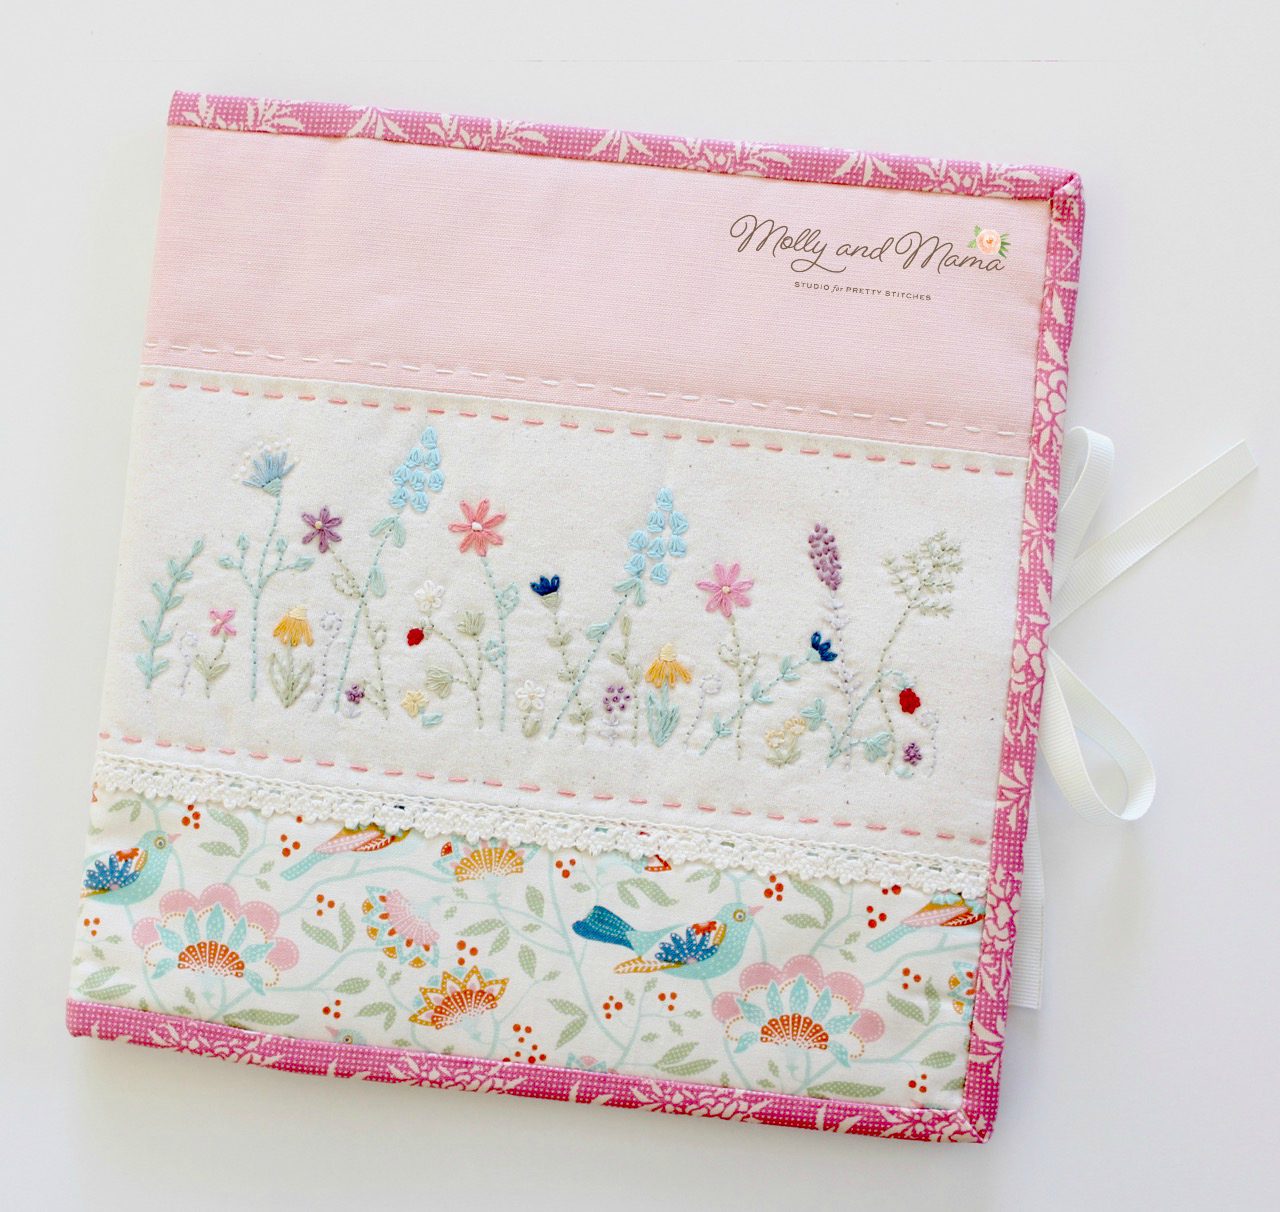 The Tilda Harvest Blog Tour and a New Sewing Kit Pattern